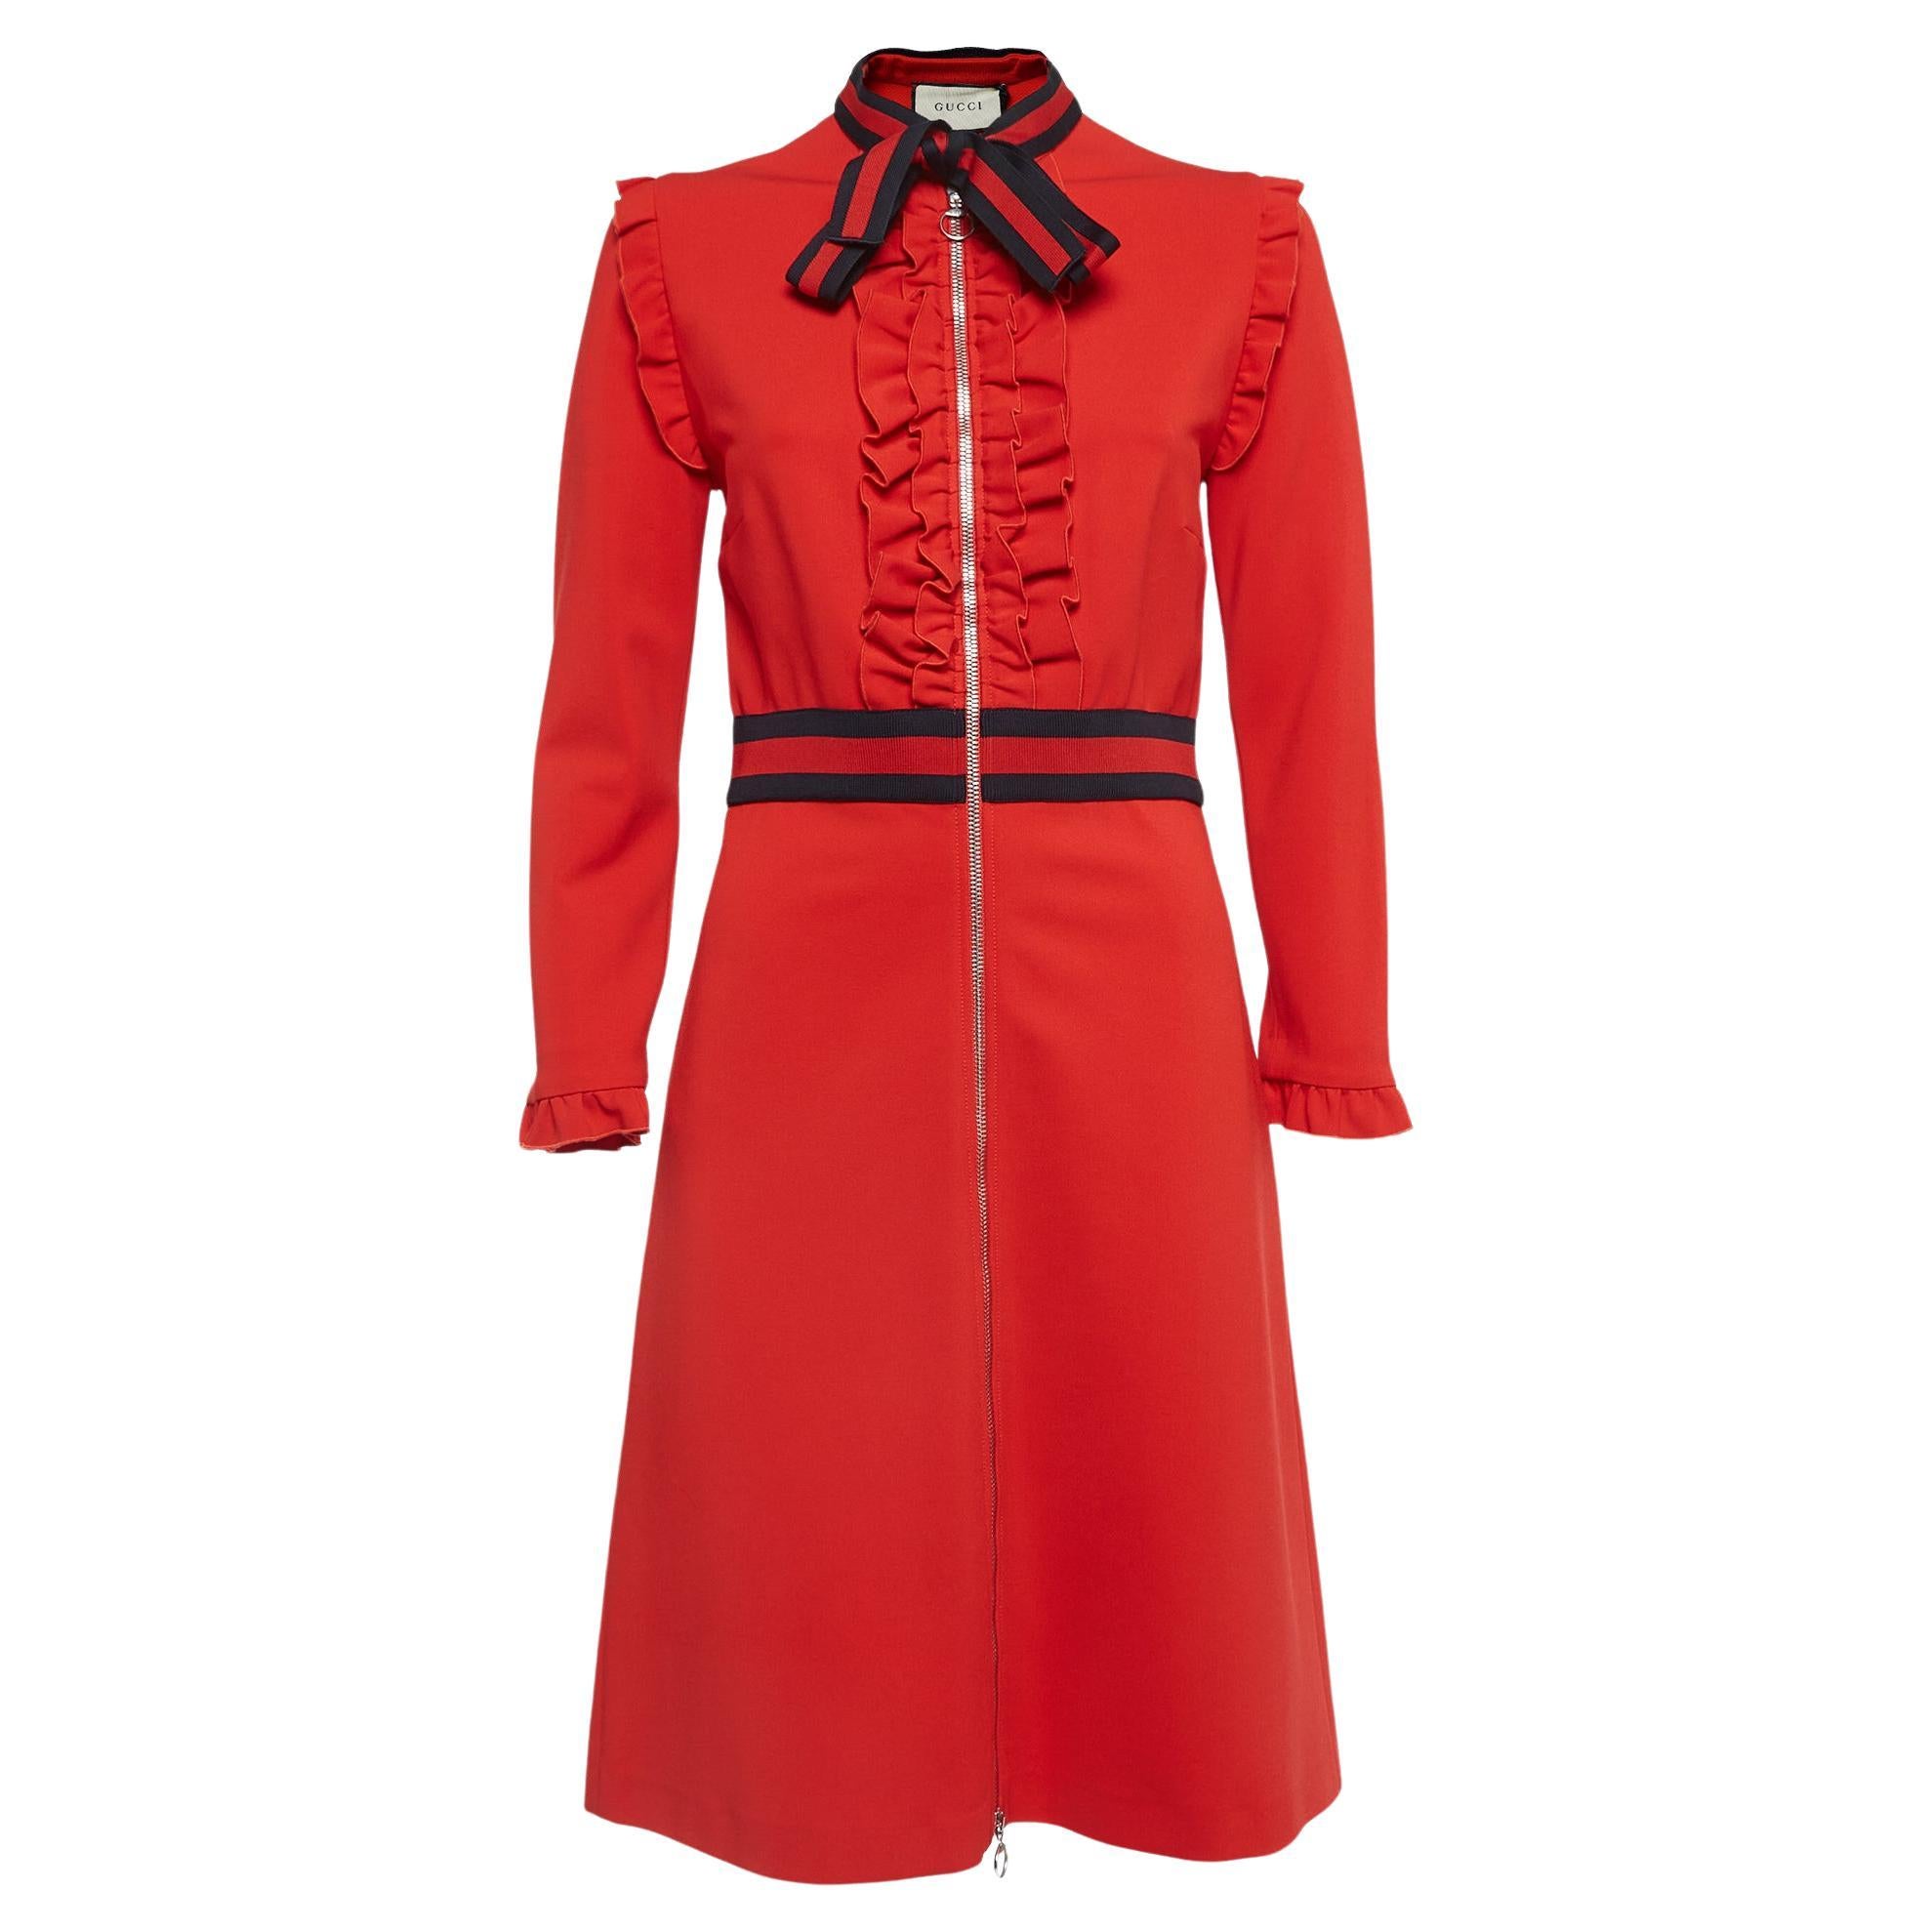 Gucci Red Jersey Tie Neck Ruffled Dress L